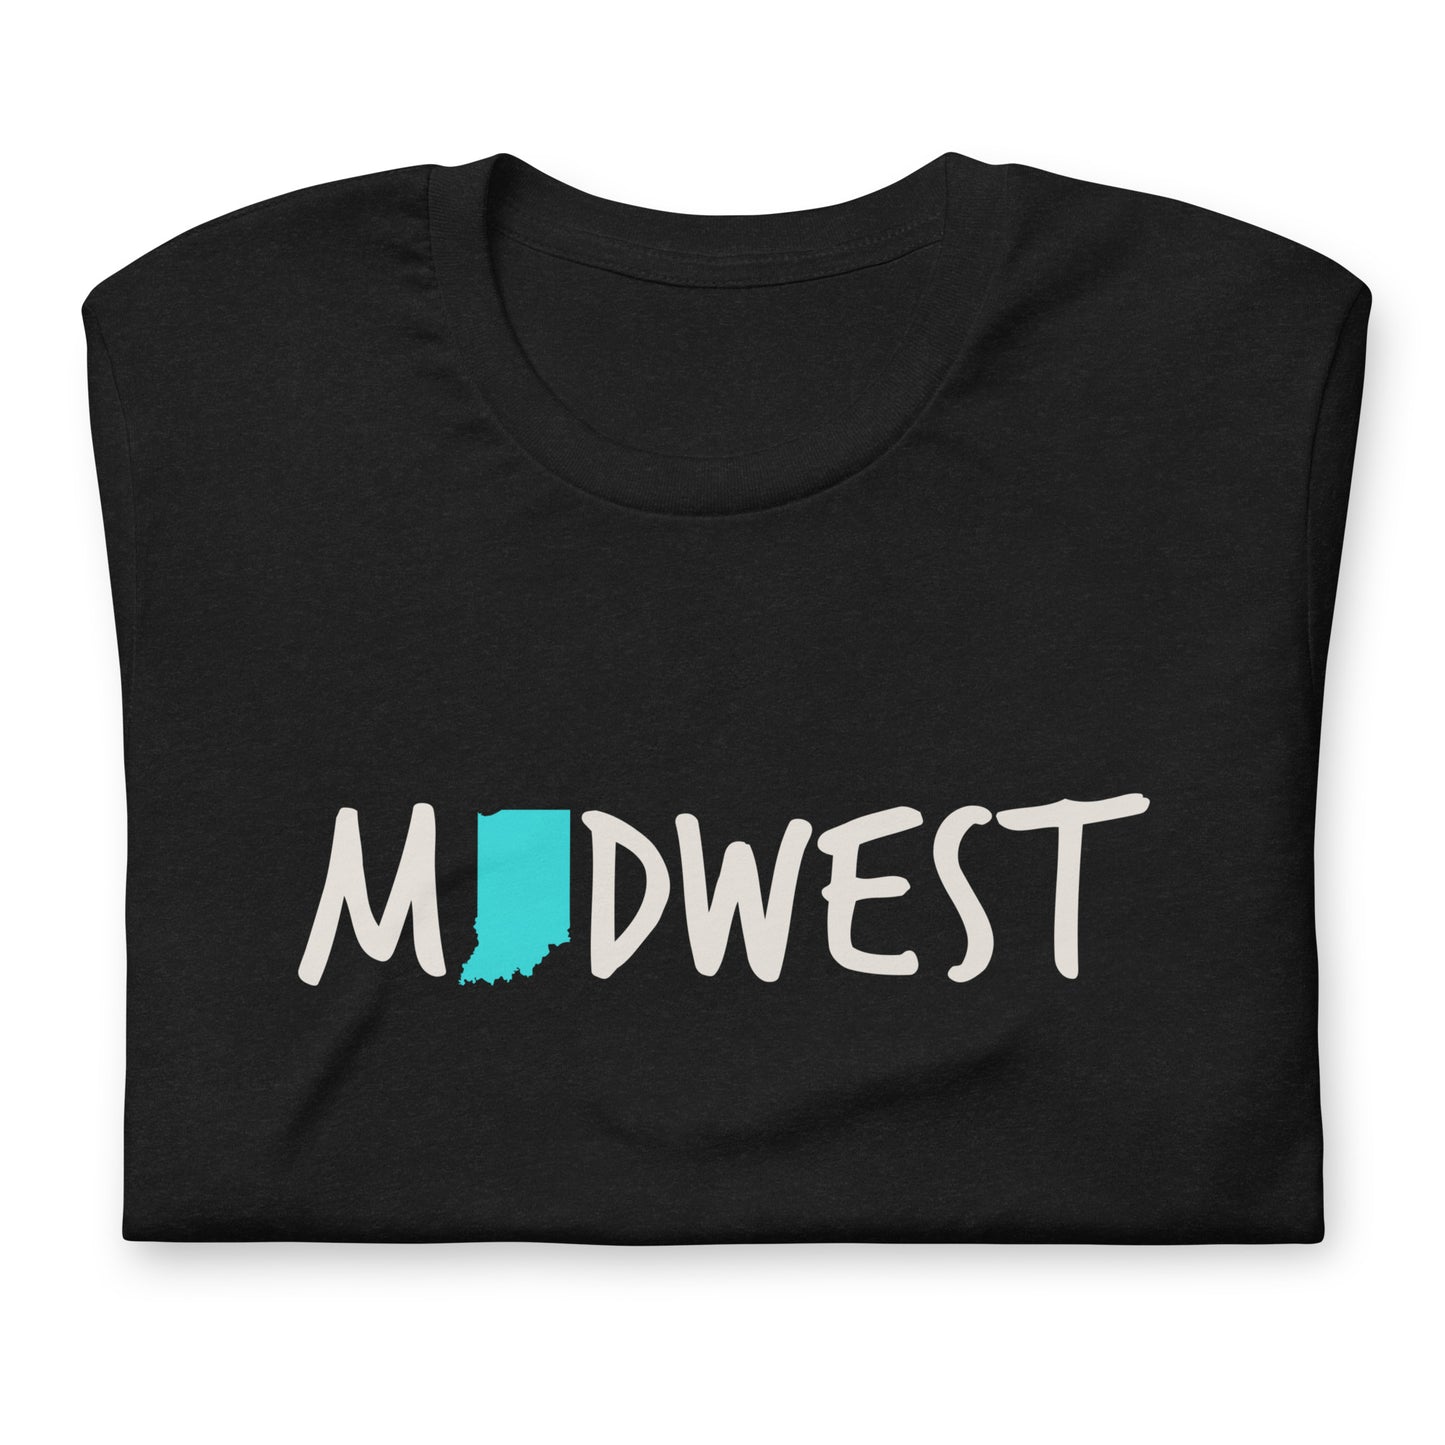 Indiana Midwest Tradition Super Soft Unisex t-shirt